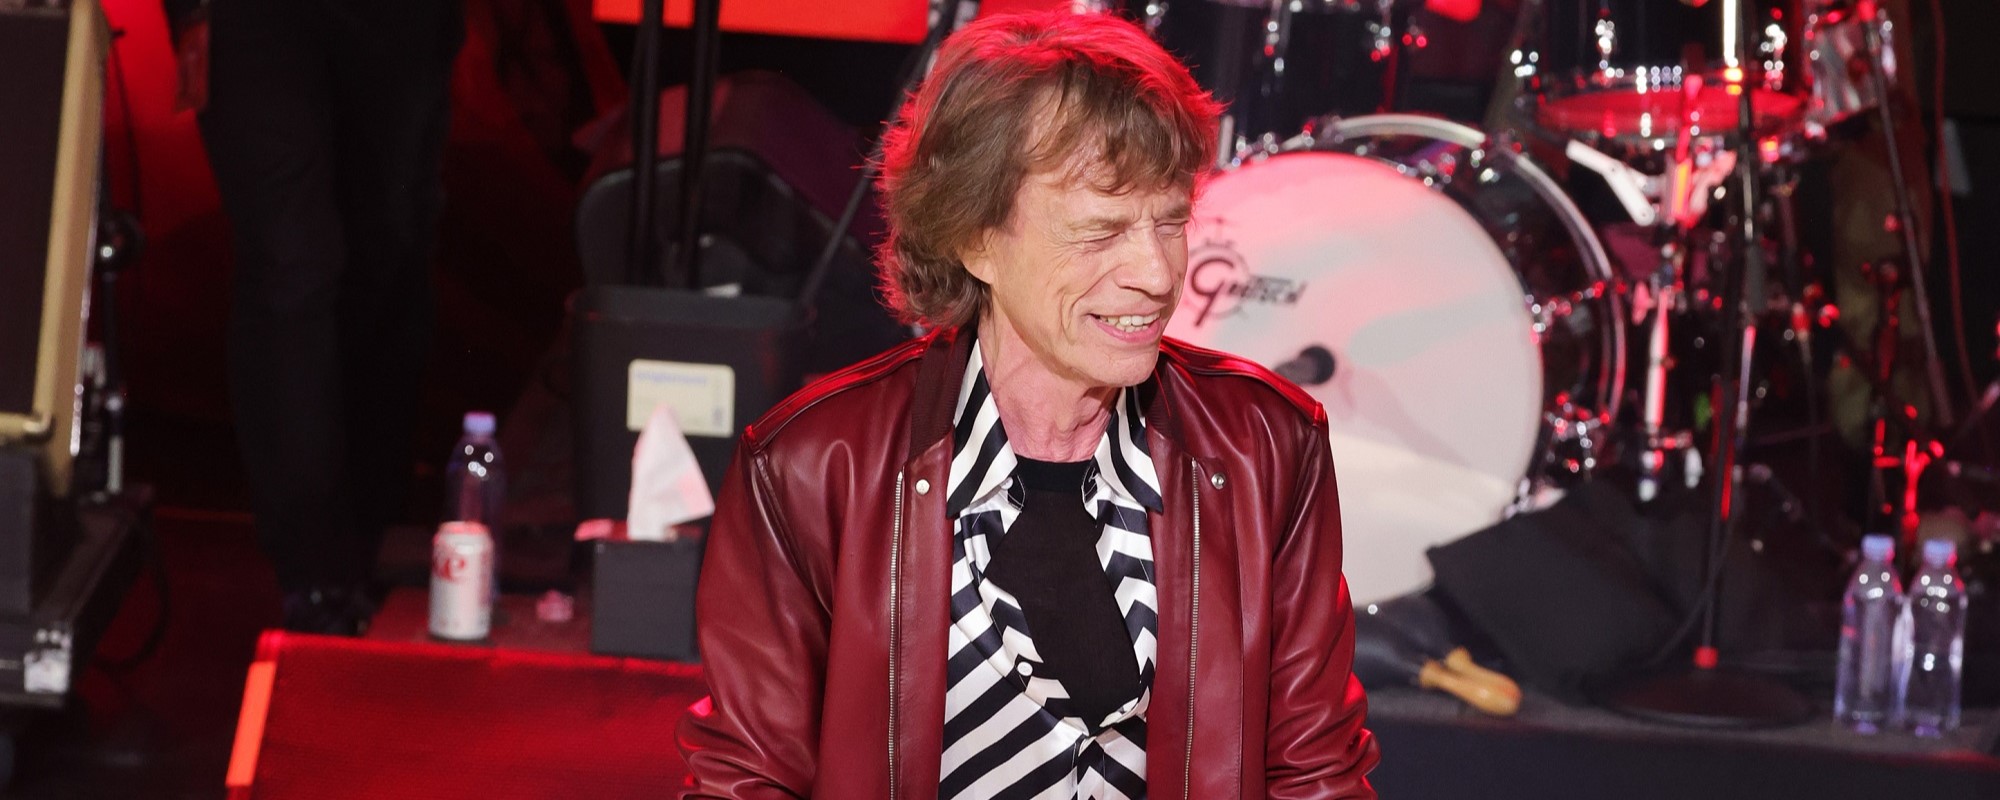 Watch Mick Jagger Belt out a Blake Shelton Tune to Seattle Crowd at The Rolling Stones Concert